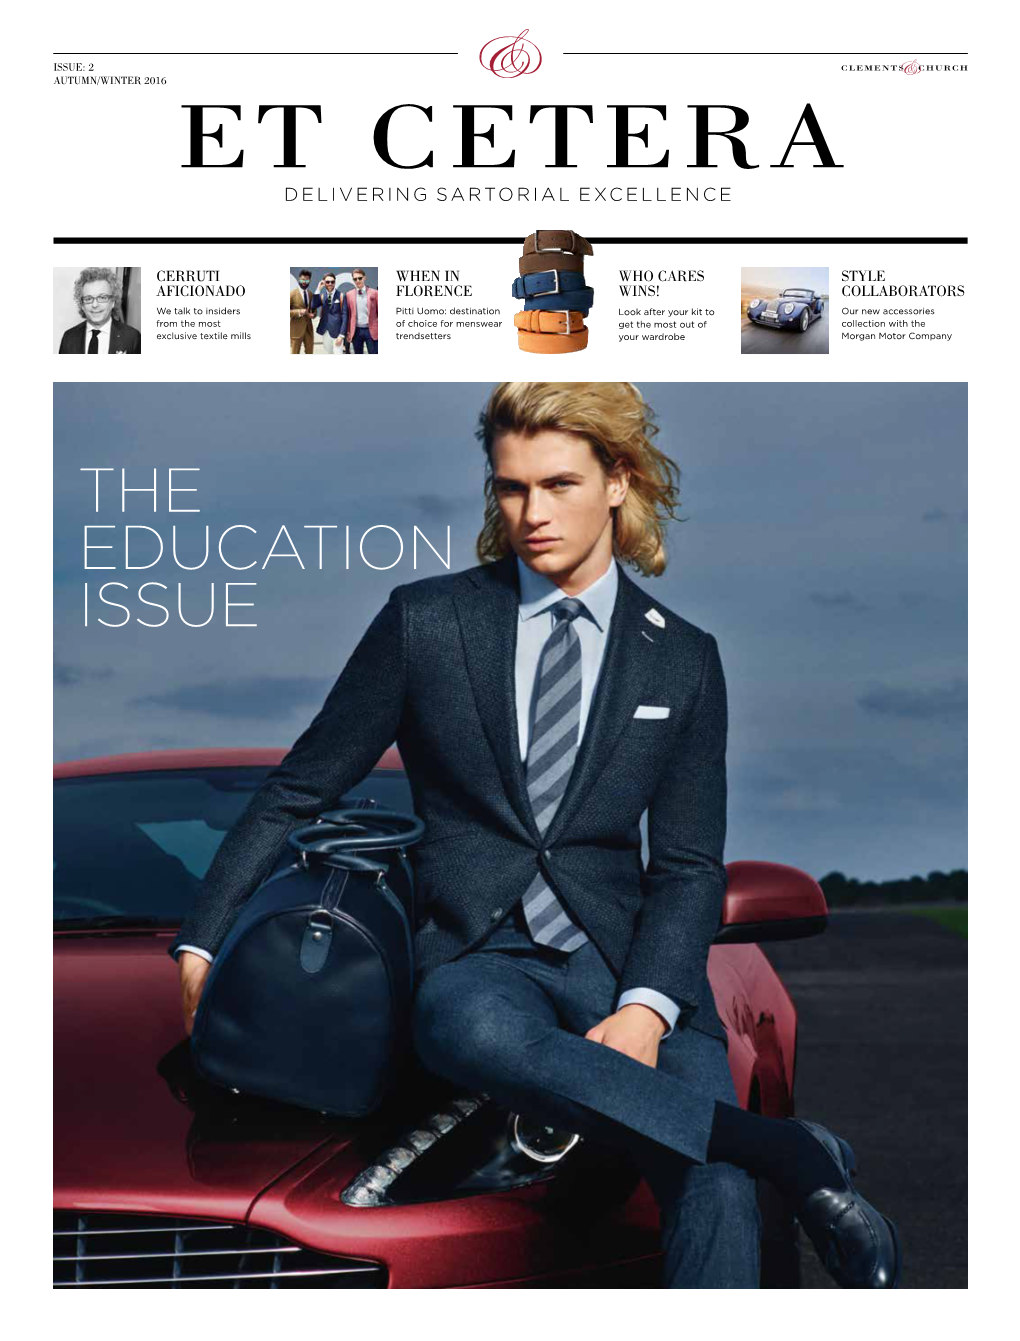 The Education Issue 2 Issue: 2 3 Inside Et Cetera